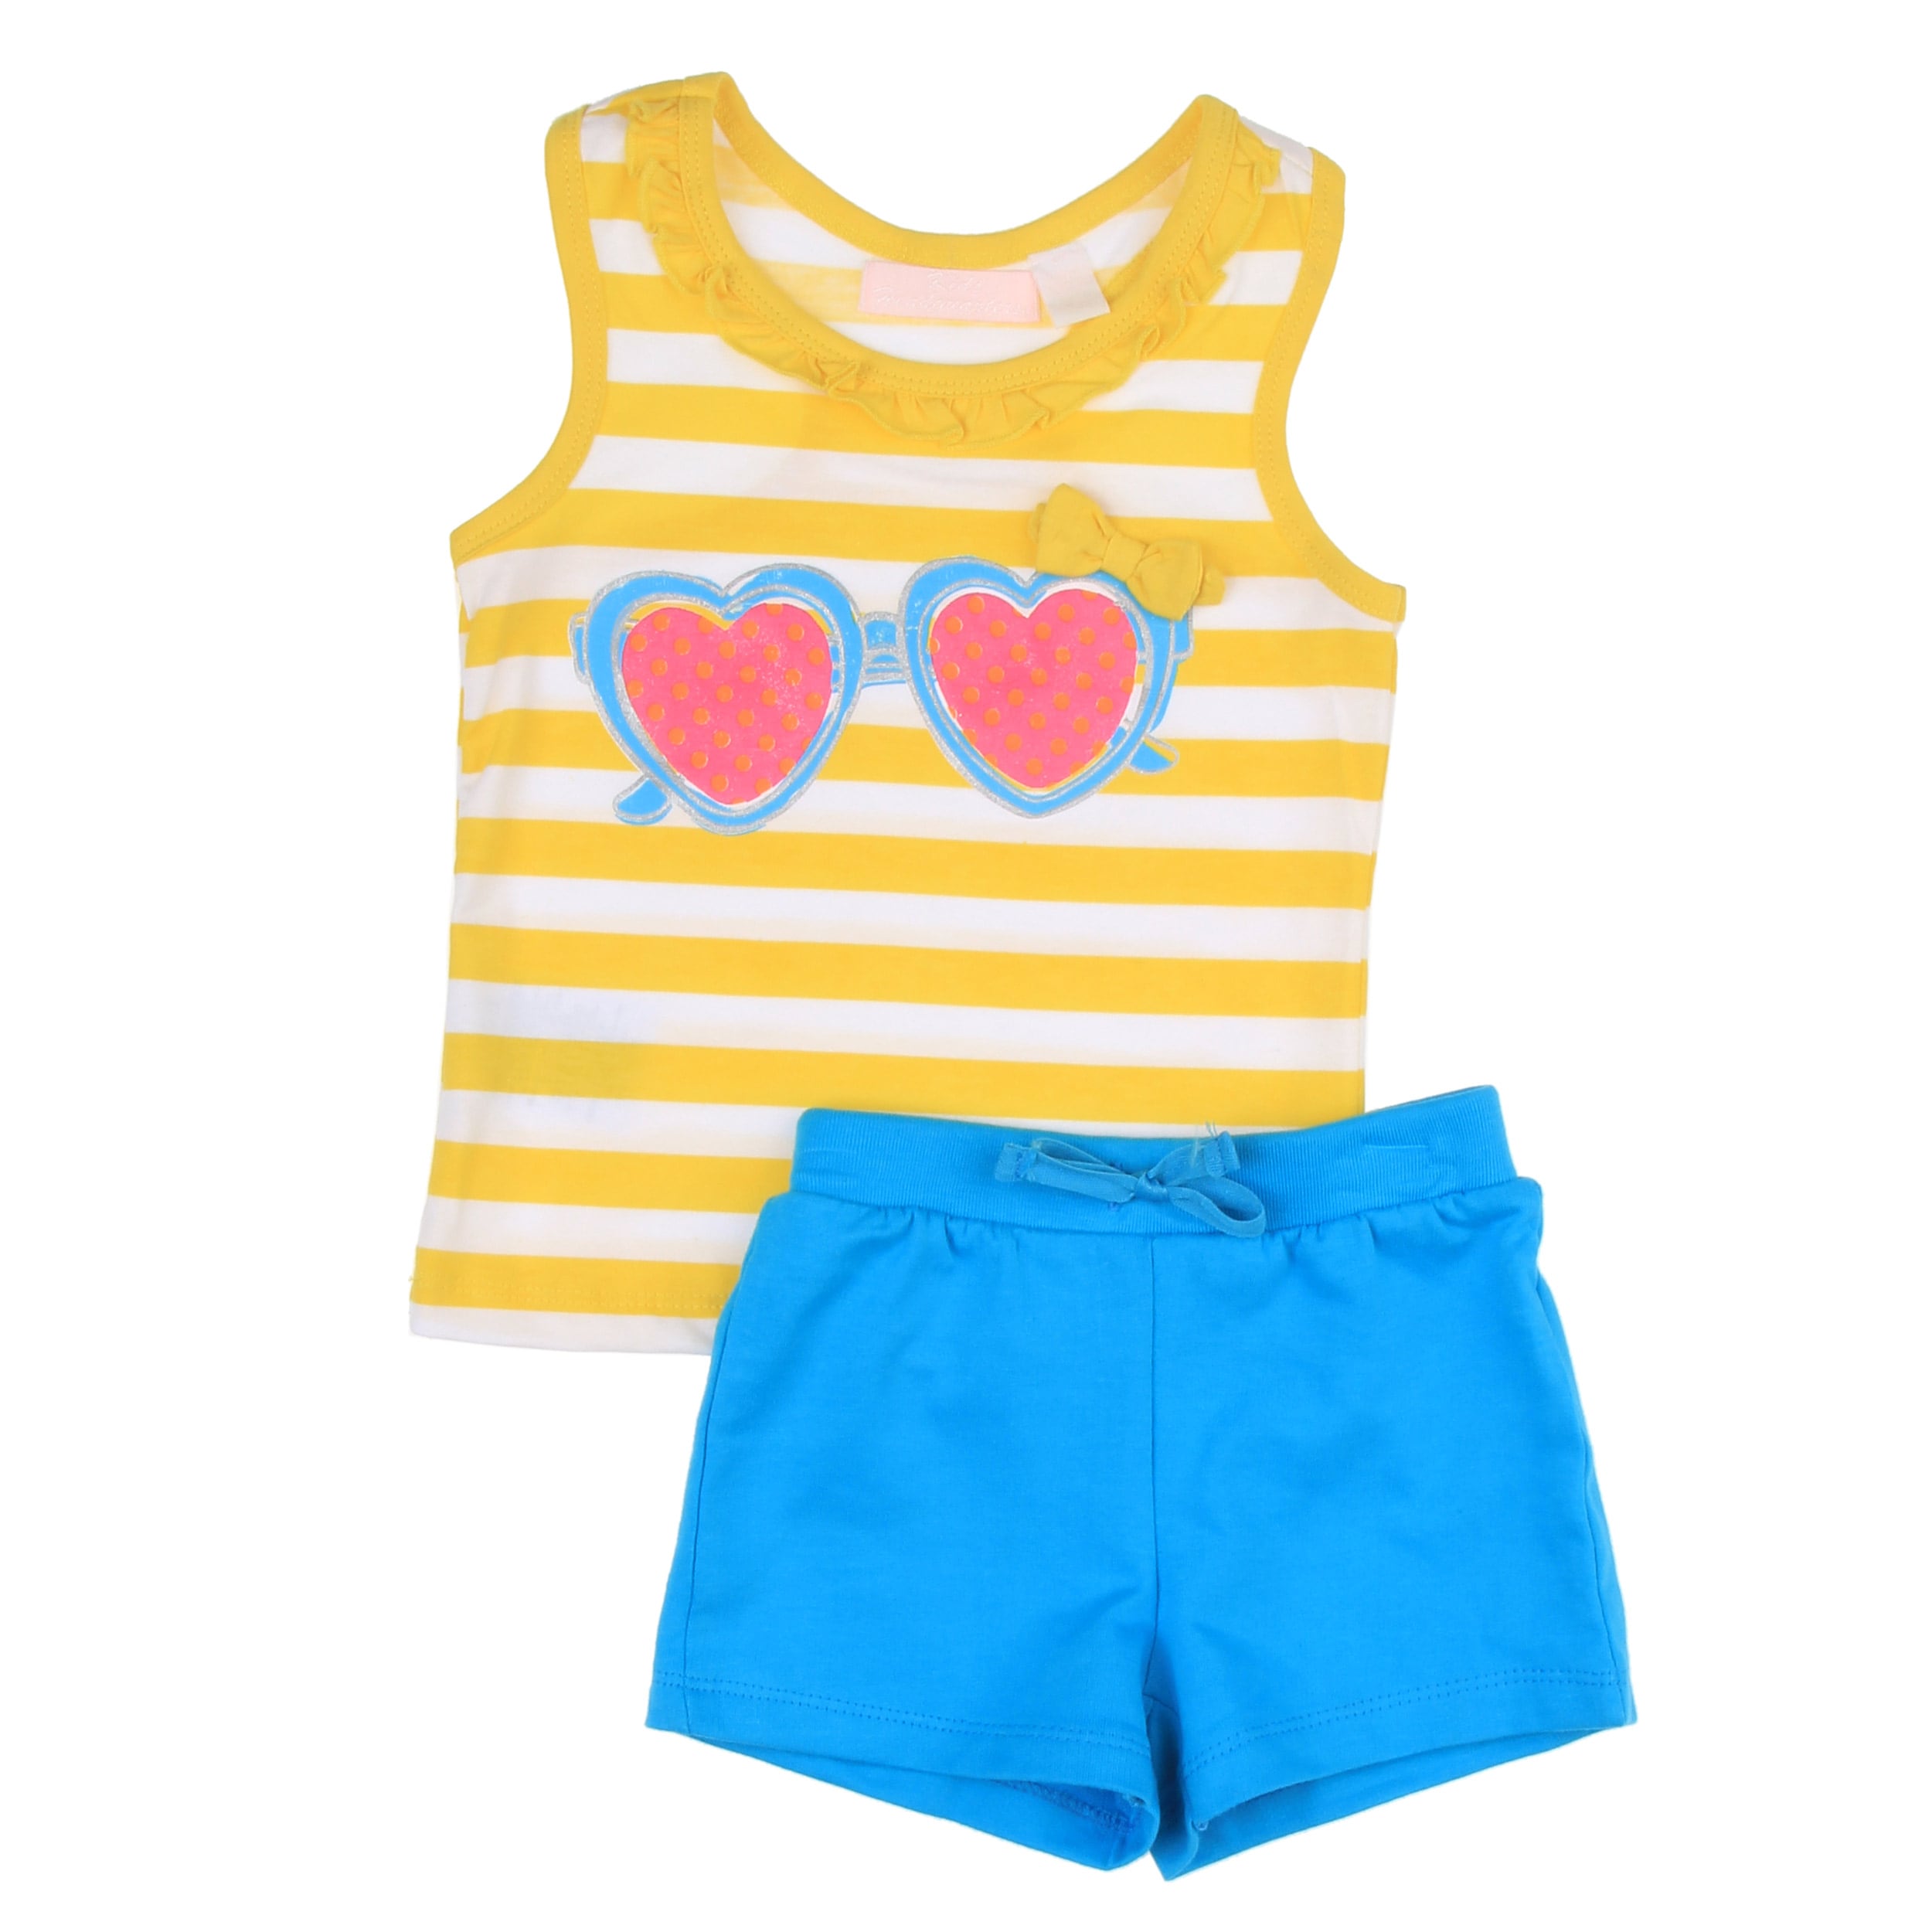 Khq Toddler Girls Yellow Top With Blue Short Set